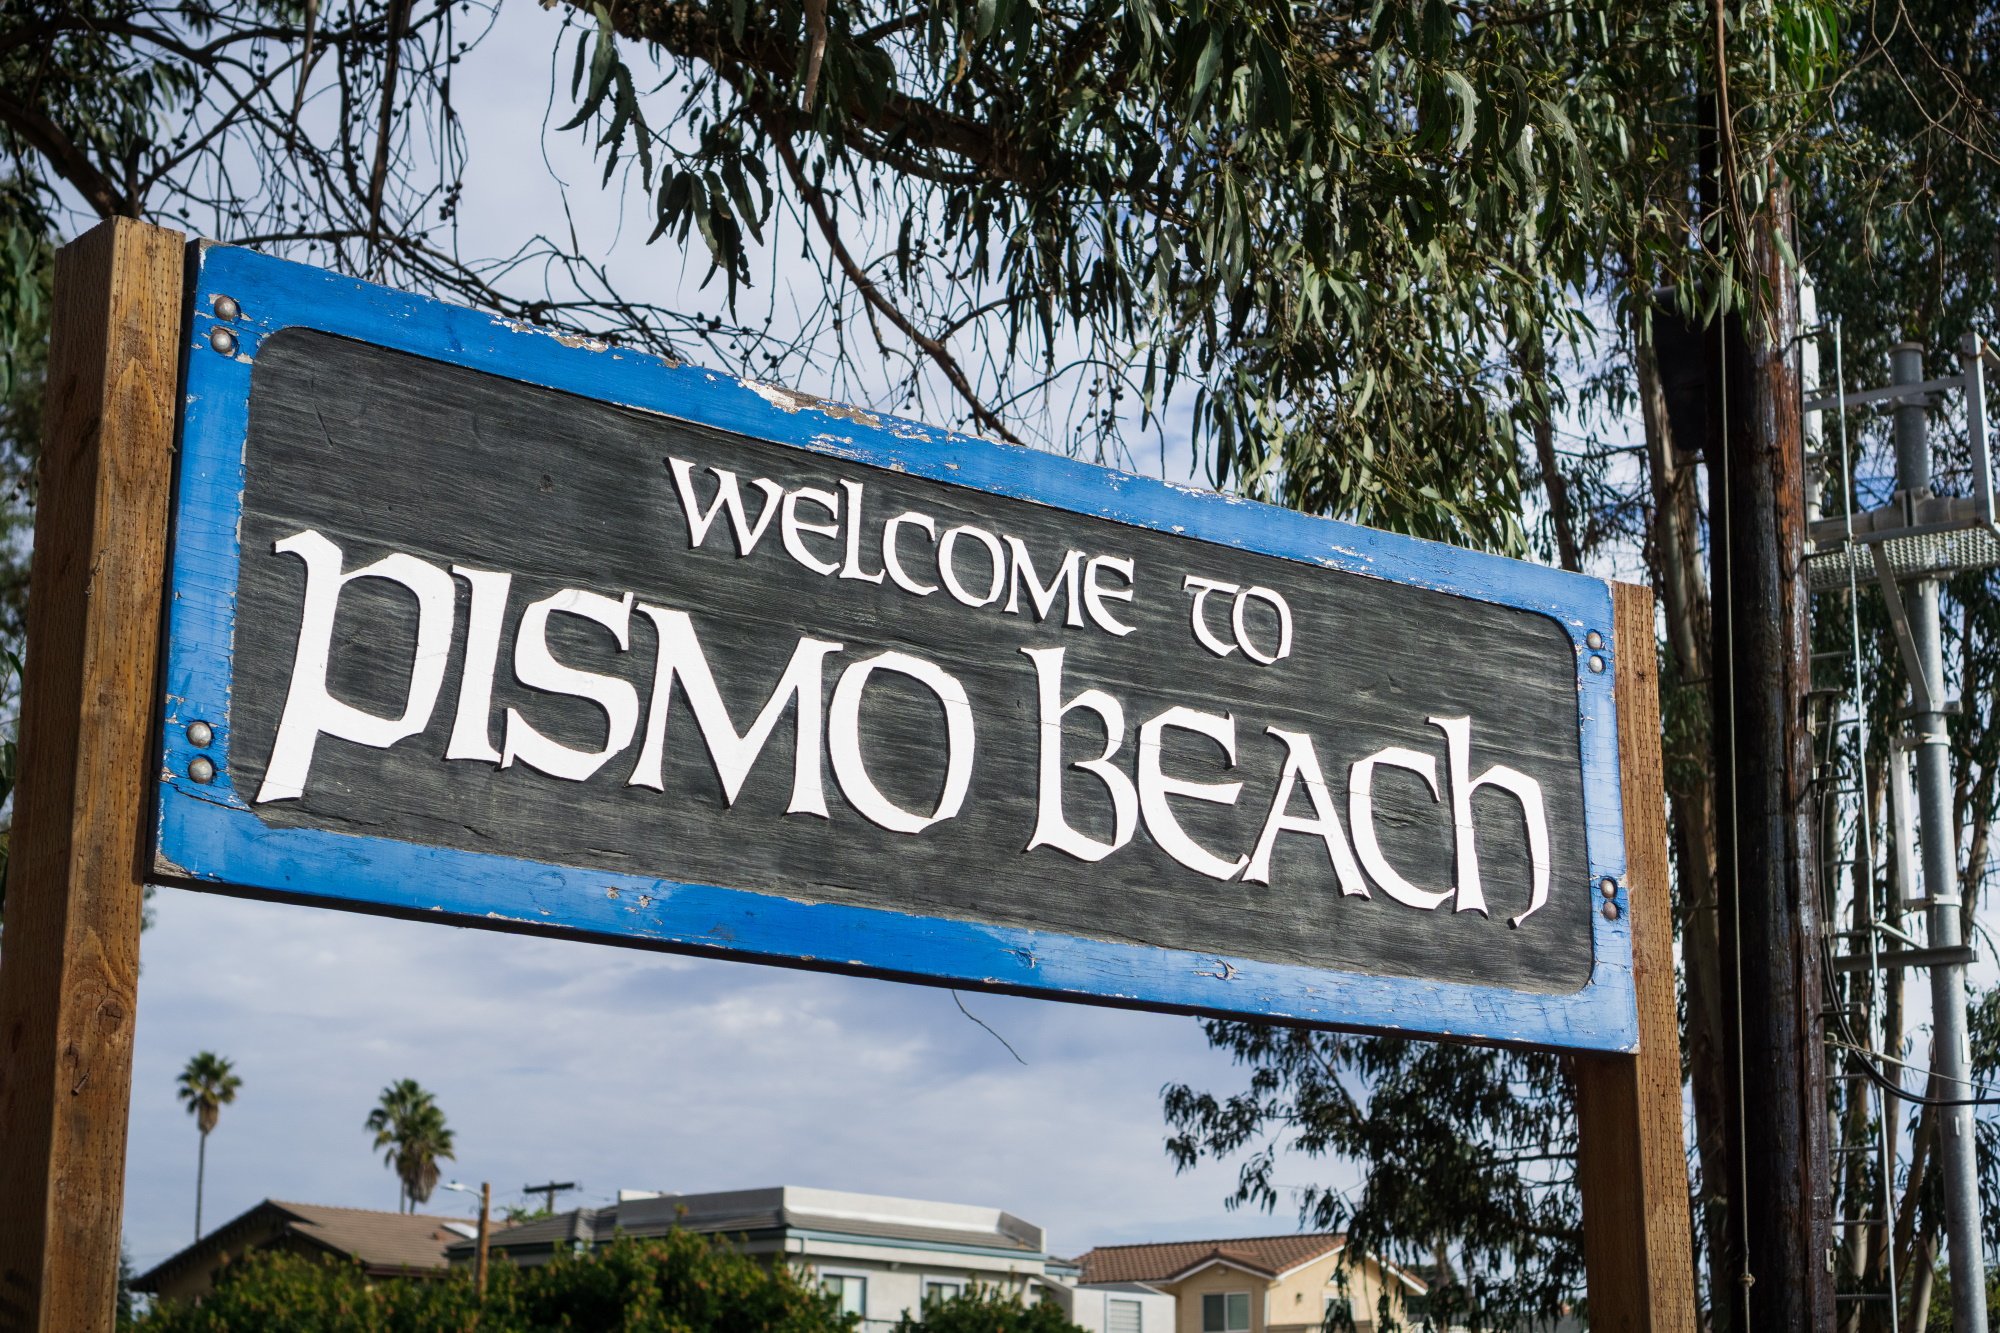 Welcome to Pismo Beach sign